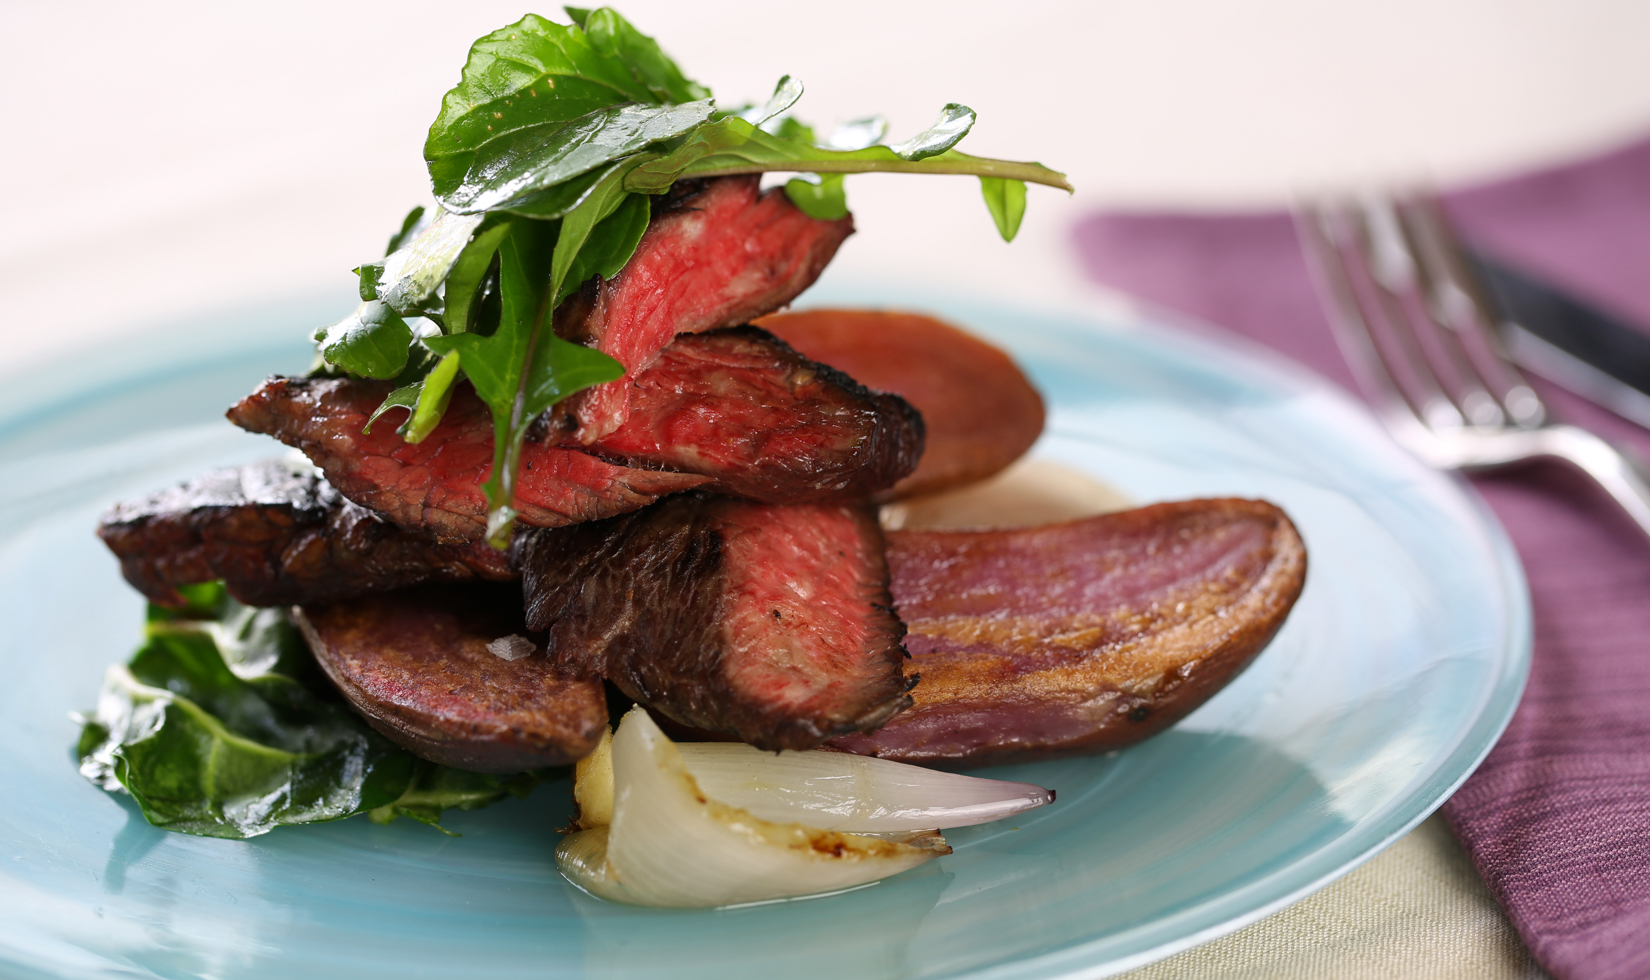 jordan winery close up of skirt steak with fingerling potatoes on blue plate with arugula